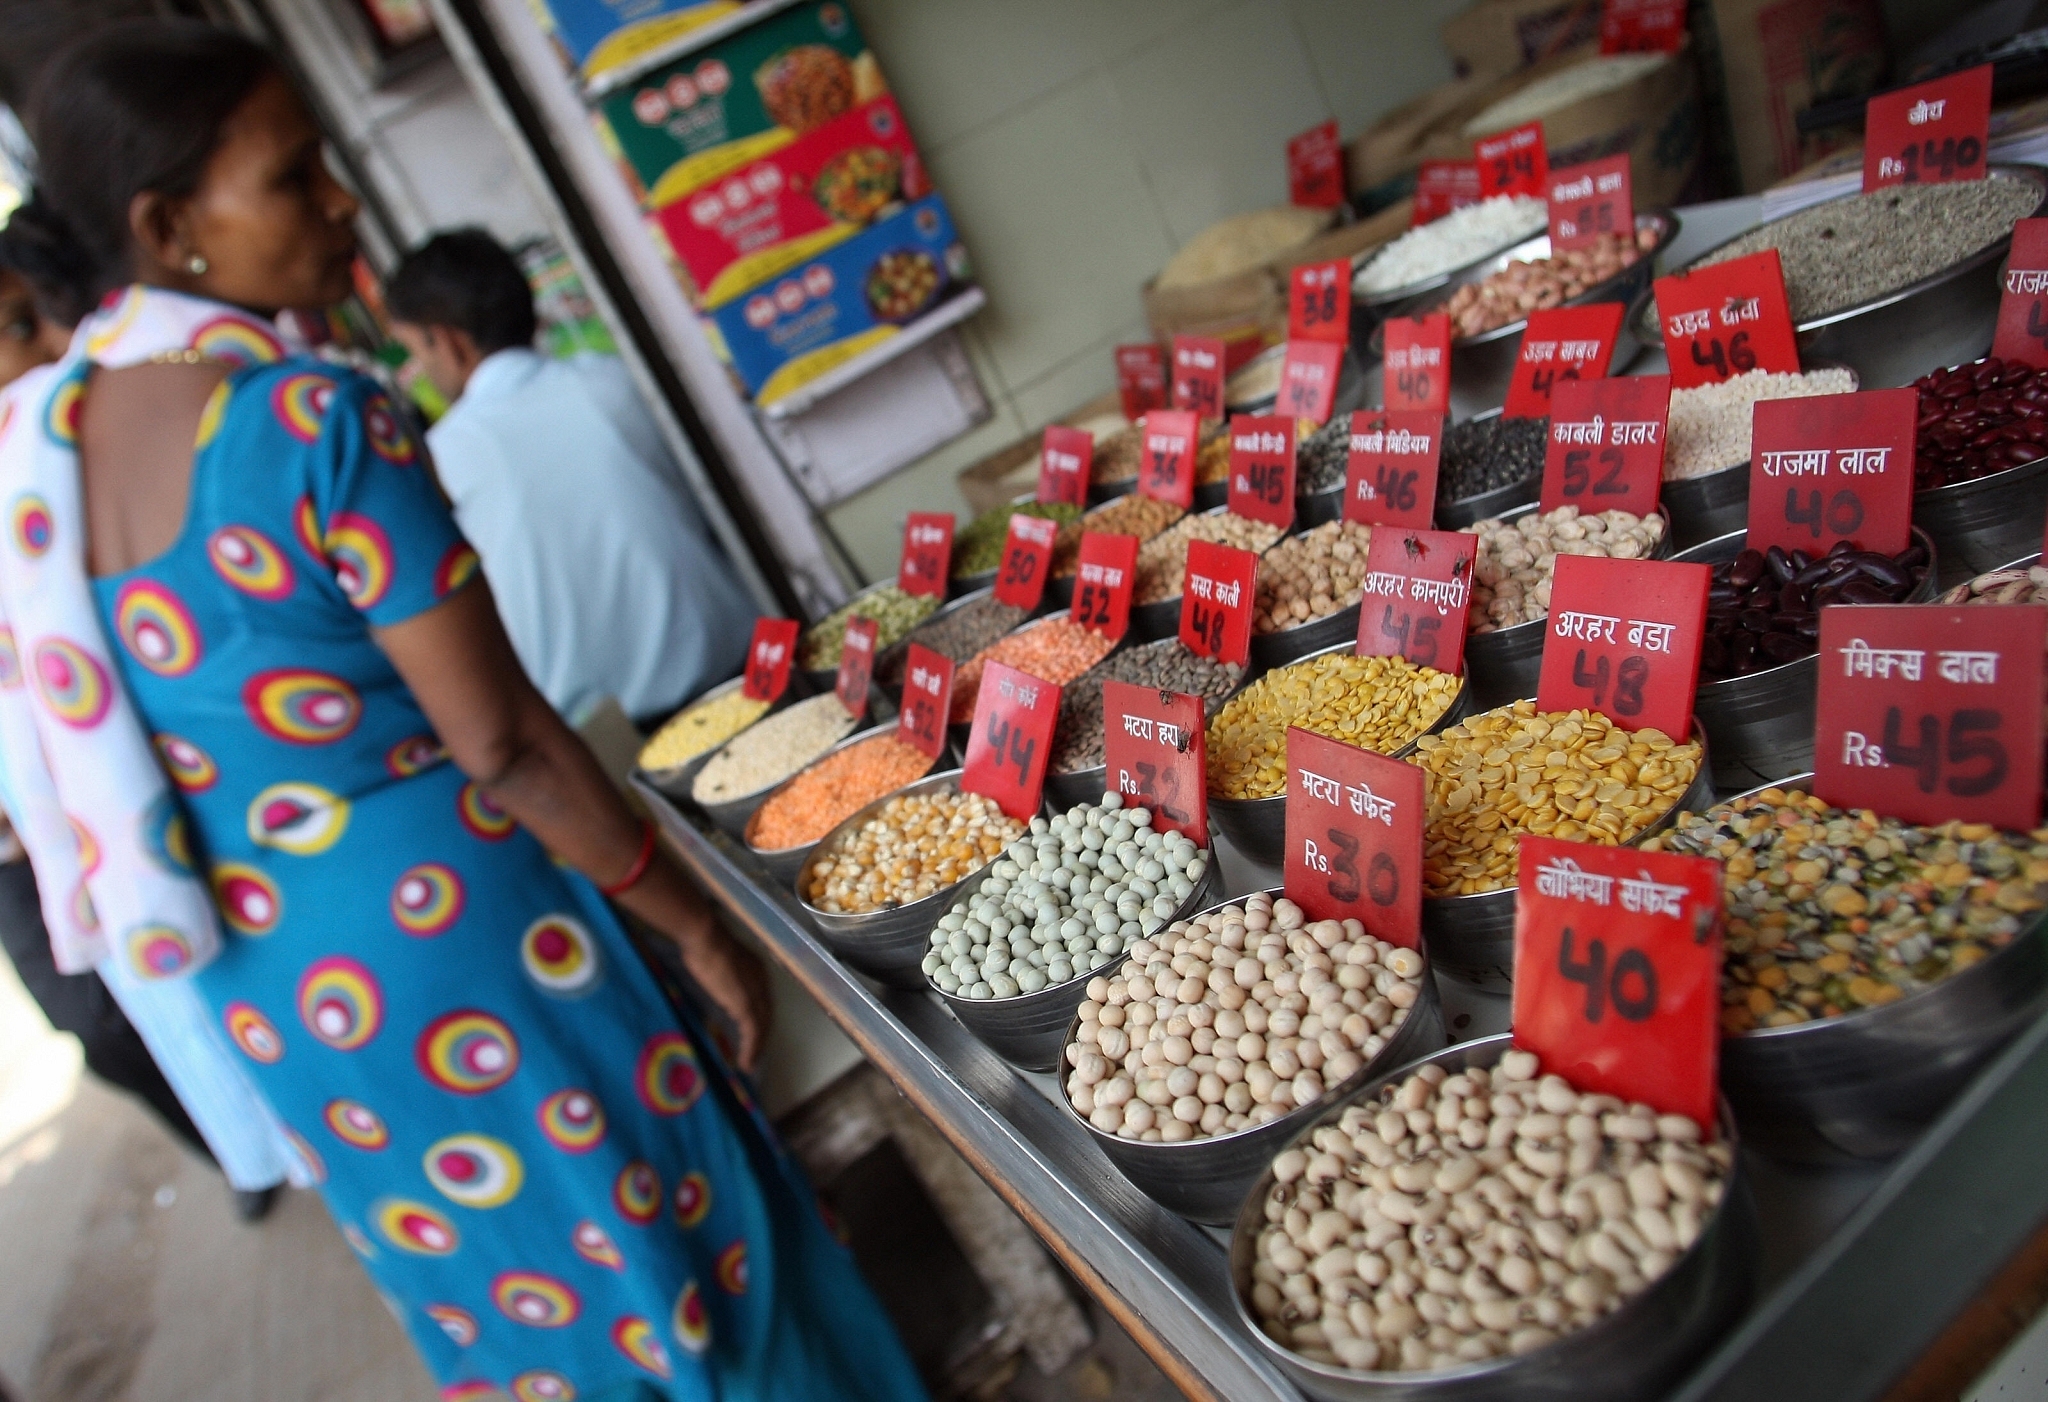 
A woman checks the price of pulses and grains at a 
wholesale market in New Delhi. Photo Credit: MANAN VATSYAYANA/AFP/Getty Image